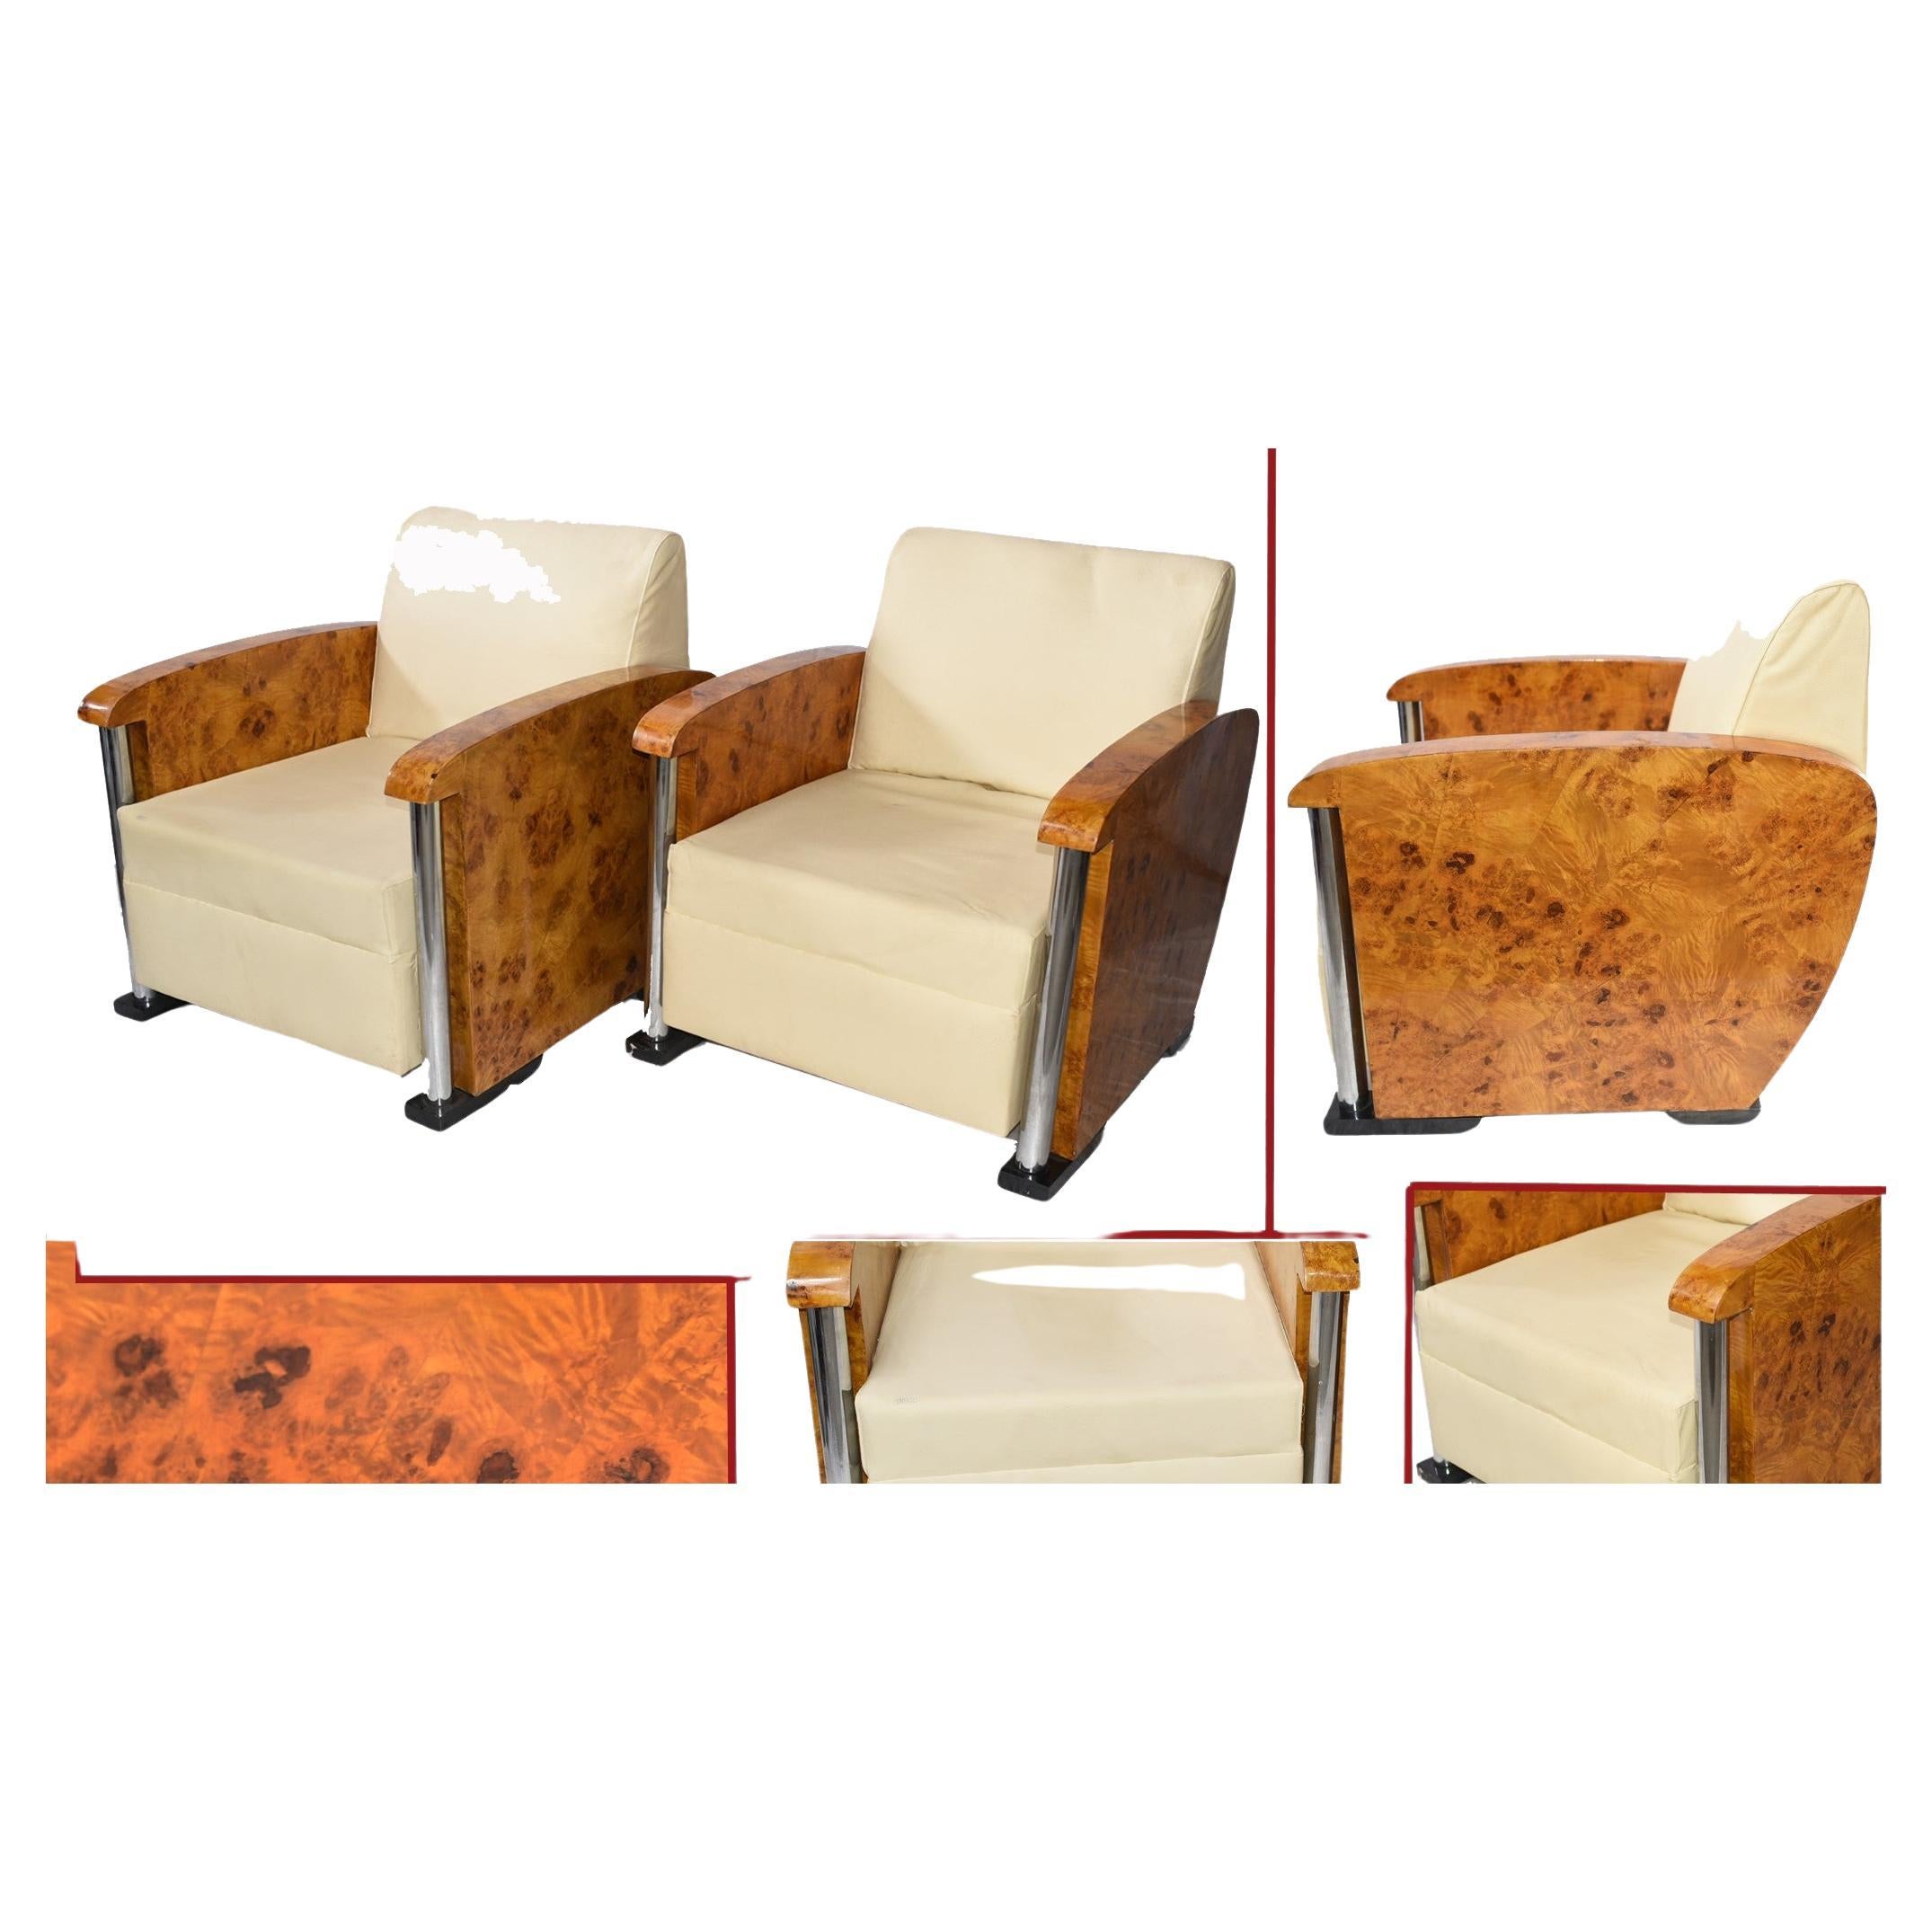 Pair Art Deco Club Chairs - Vintage Interiors For Sale